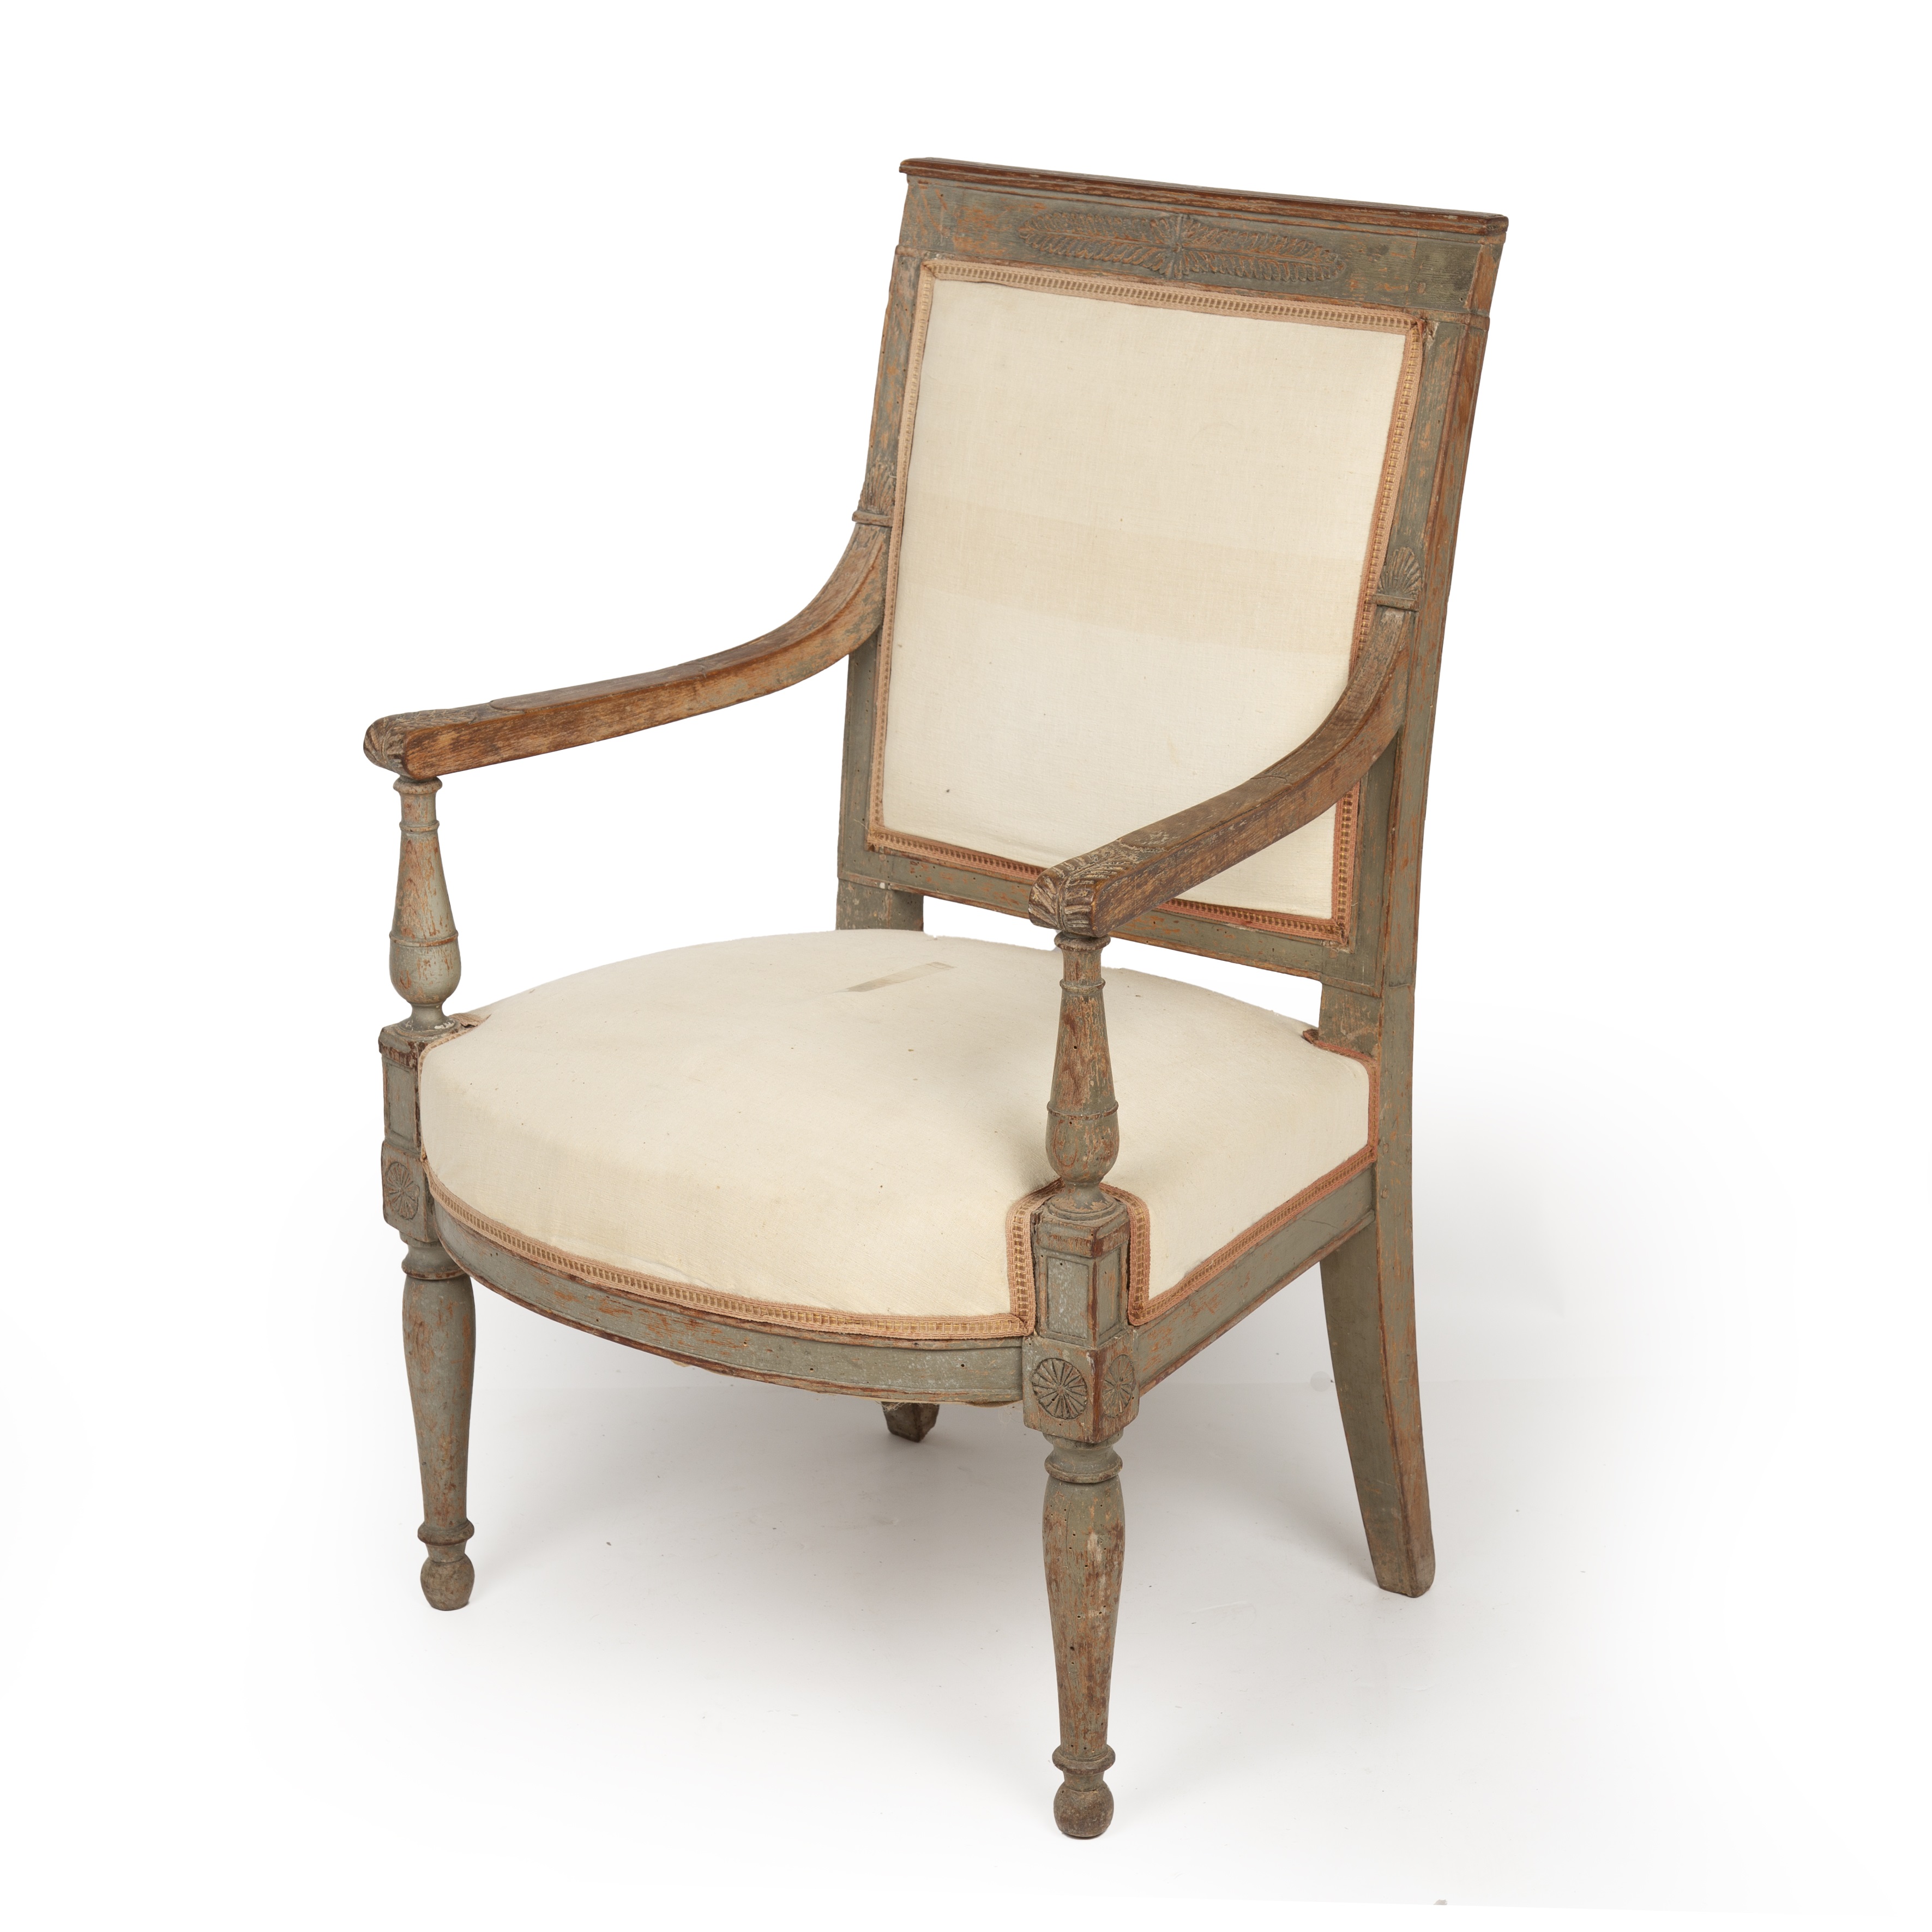 A 19th century French painted open armchair with a square back and turned legs 58cm wide 49cm deep - Image 3 of 4